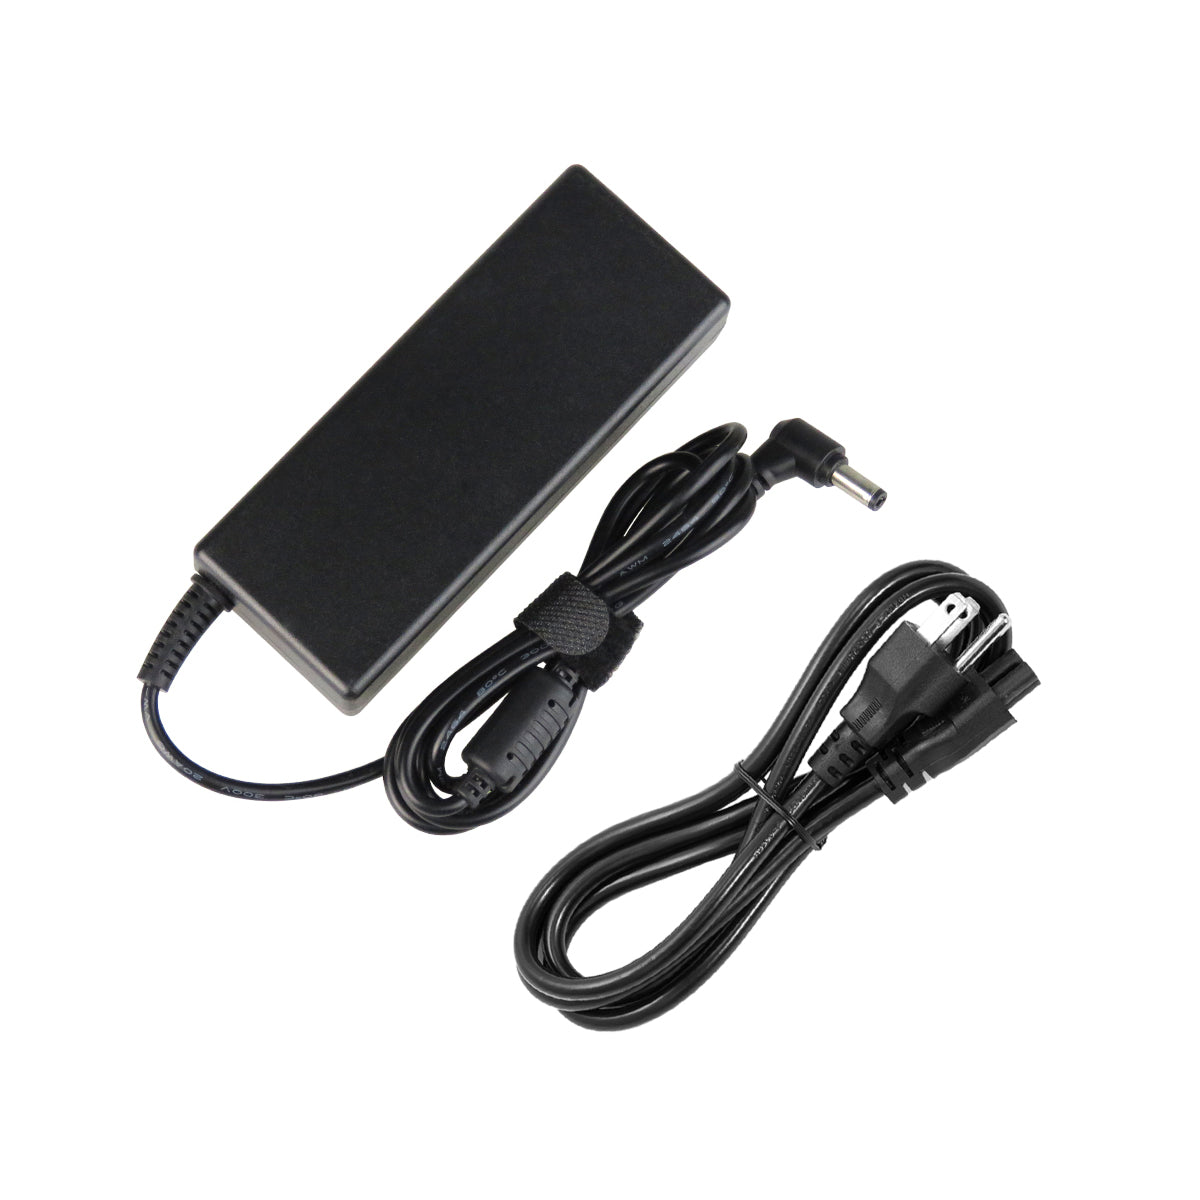 AC Adapter Charger for Gateway M-68 Notebook.